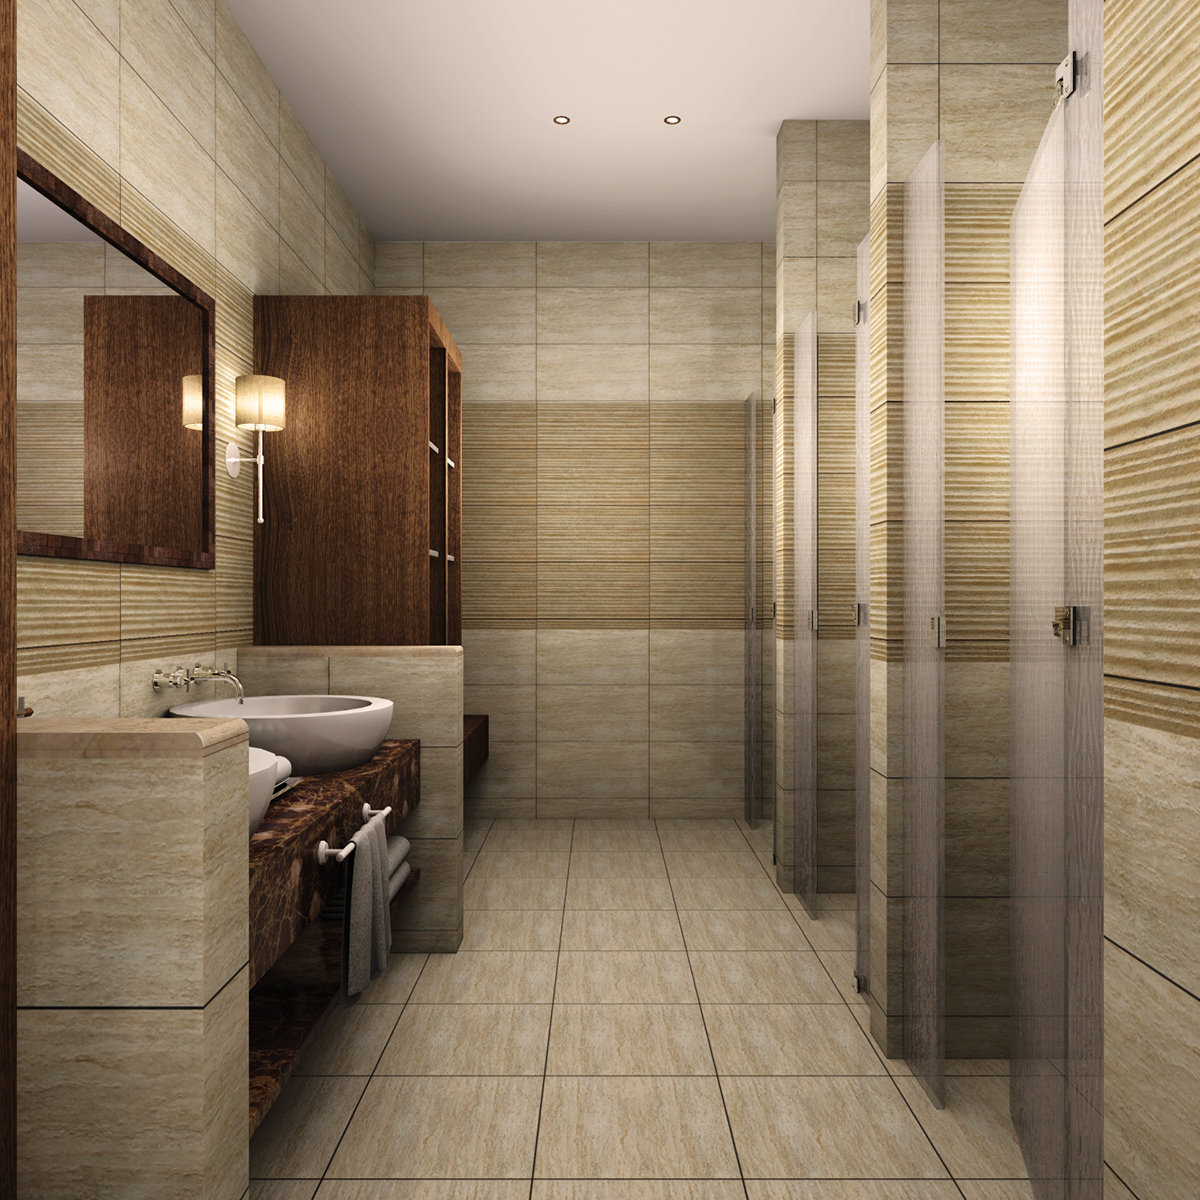 Interior bathroom kitchen changing room home spaces wood warm modern neo-classic